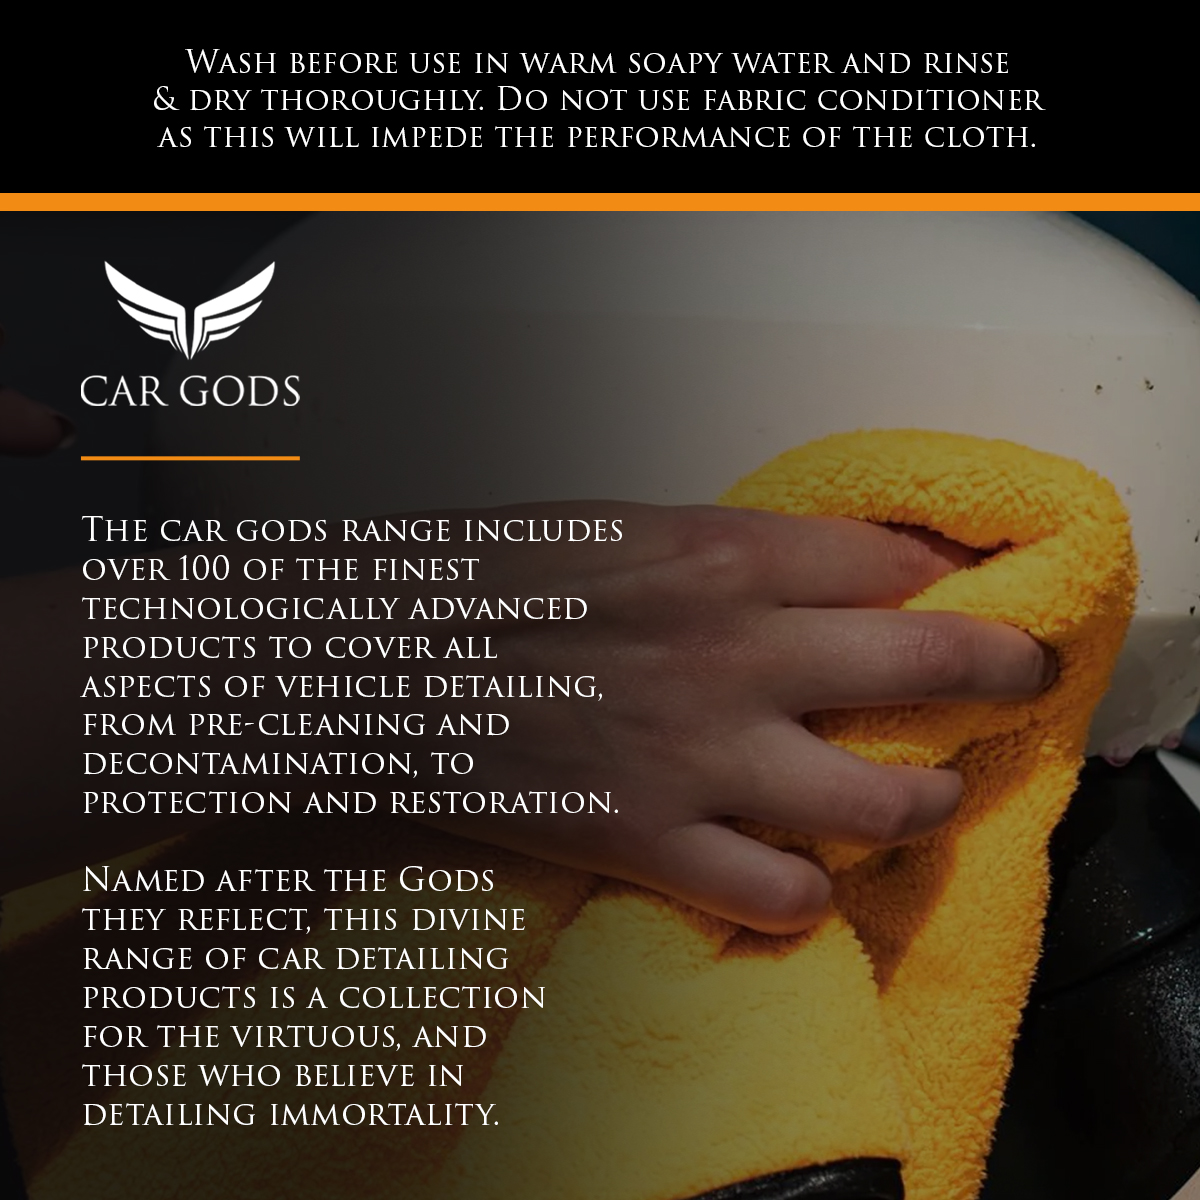 Wash before use in warm soapy water and rinse & dry thoroughly. Do not use fabric conditioner as this will impede the performance of the cloth. The Car Gods range includes over 100 of the finest technologically advanced products to cover all aspects of vehicle detailing, from pre-cleaning and decontamination to protection and restoration. Named after the Gods they reflect, this divine range of car detailing products is a collection for the virtuous, and those who believe in detailing immortality.